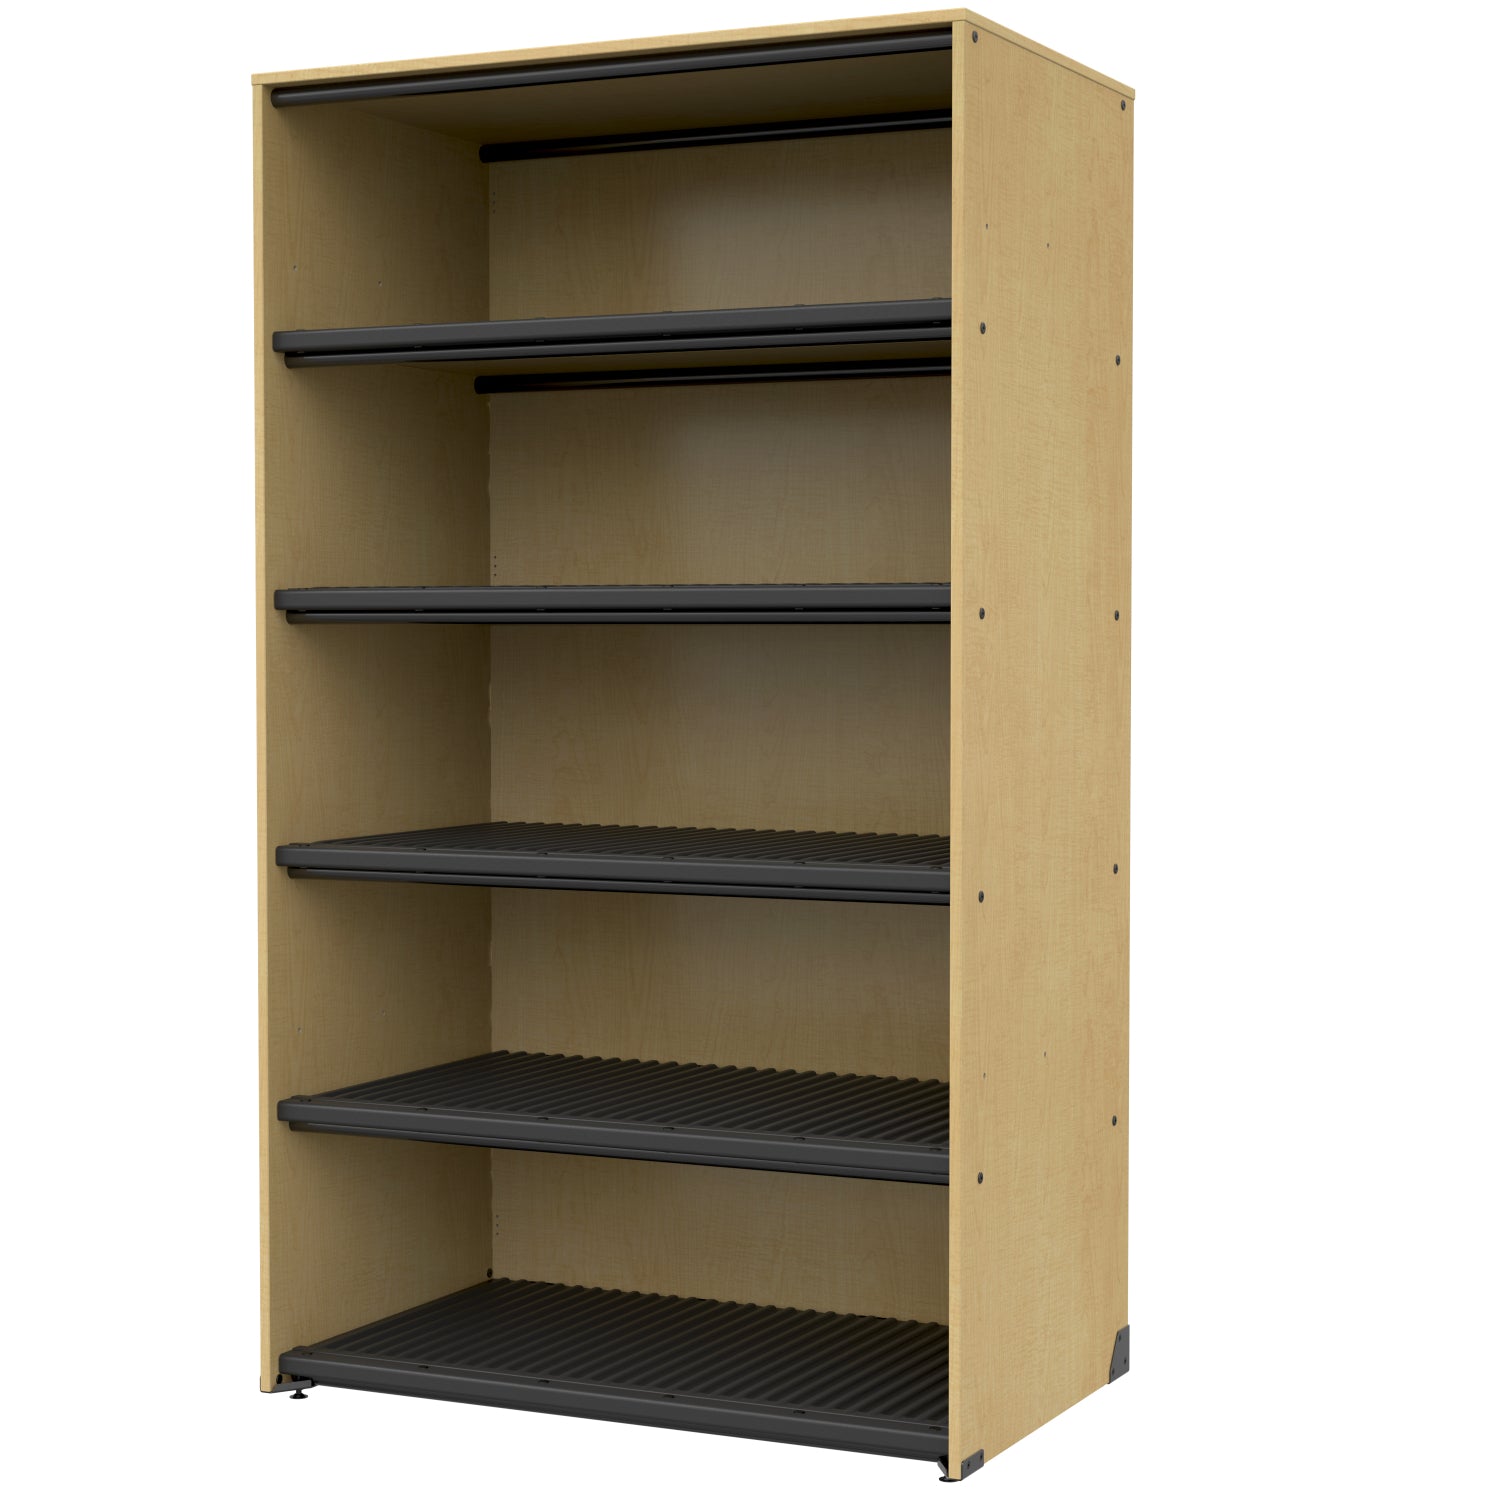 Bandstor™ Wide 5-Compartment Hat Storage, 48"W x 84"H x 29.25"D